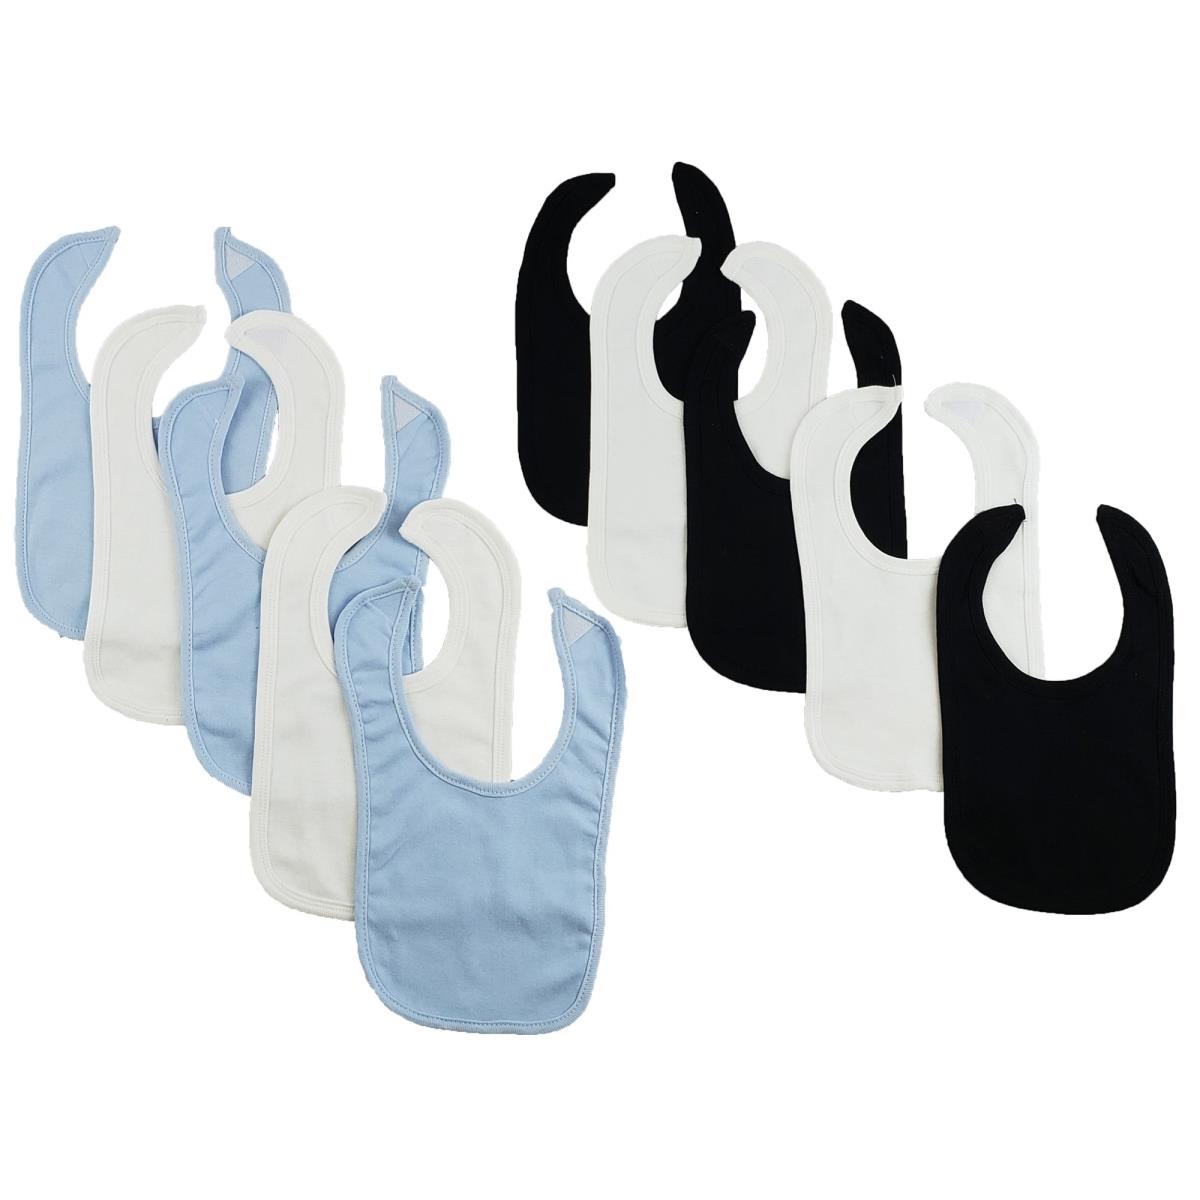 Picture of Bambini CS-0117 12.25 x 7.5 in. Baby Bibs - Blue &#44; White & Black - One Size - 10 per Pack